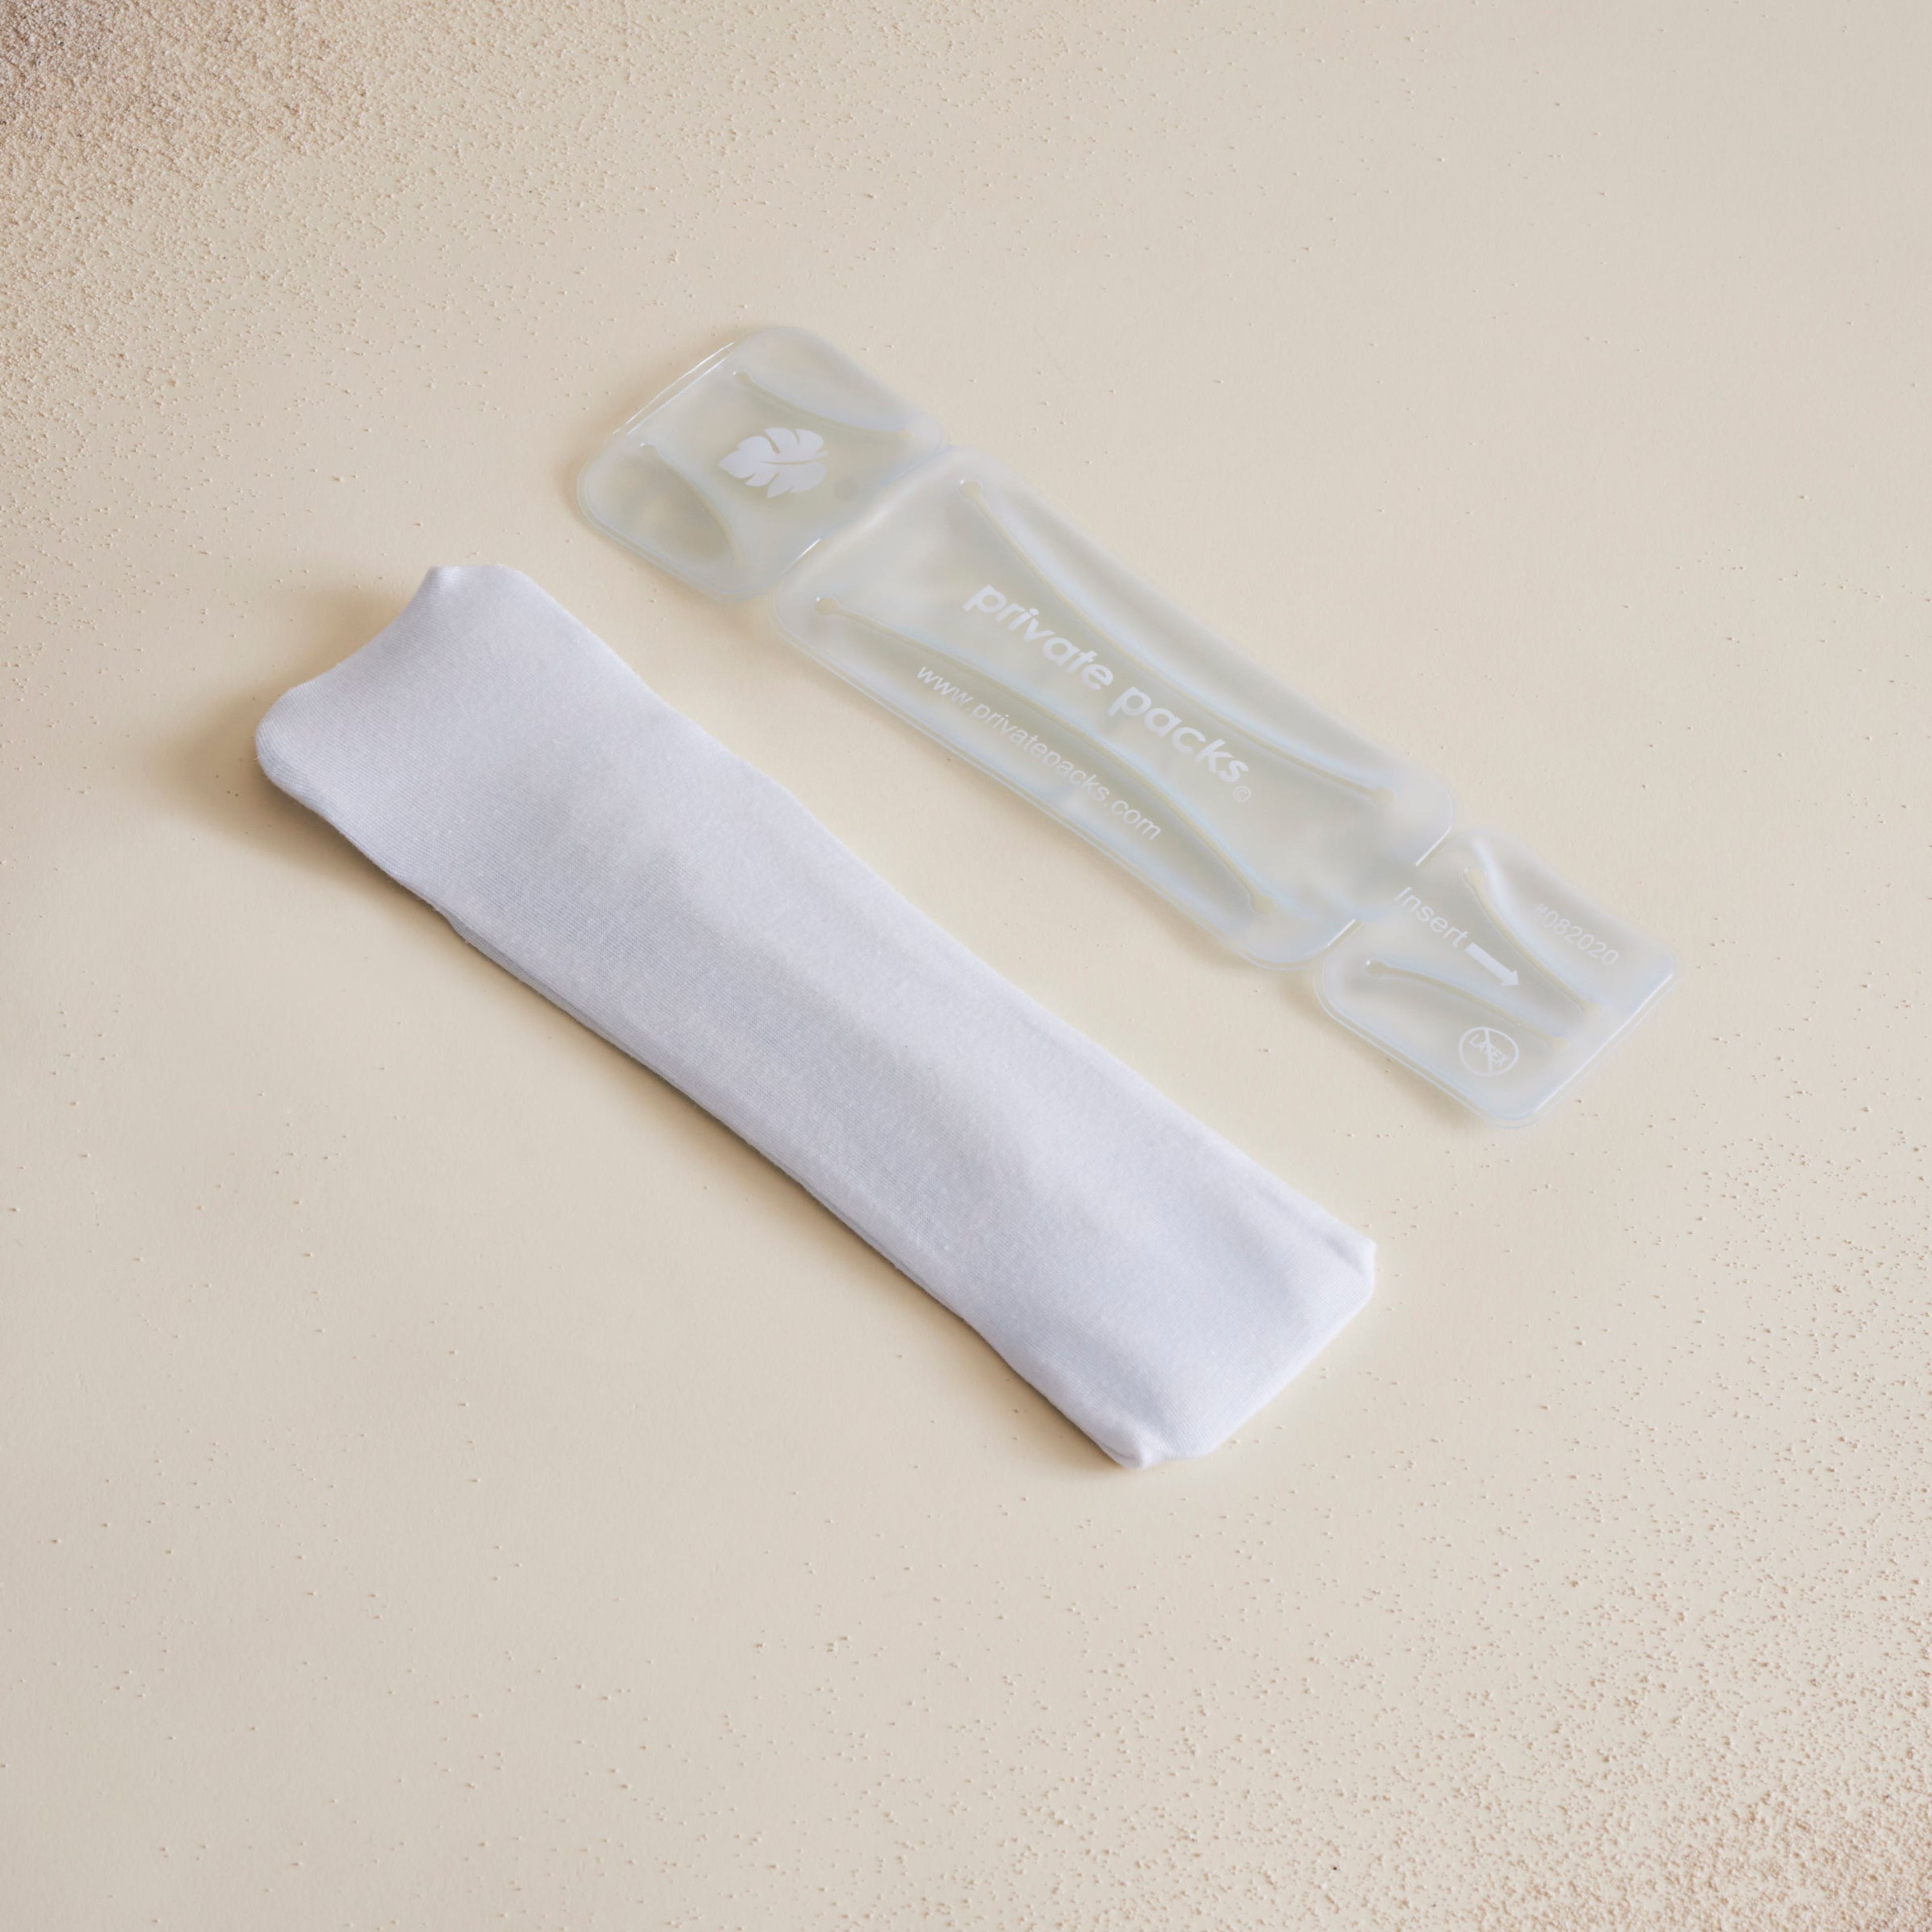 Hot/Cold Vulva Personal Pads, 2 Pack